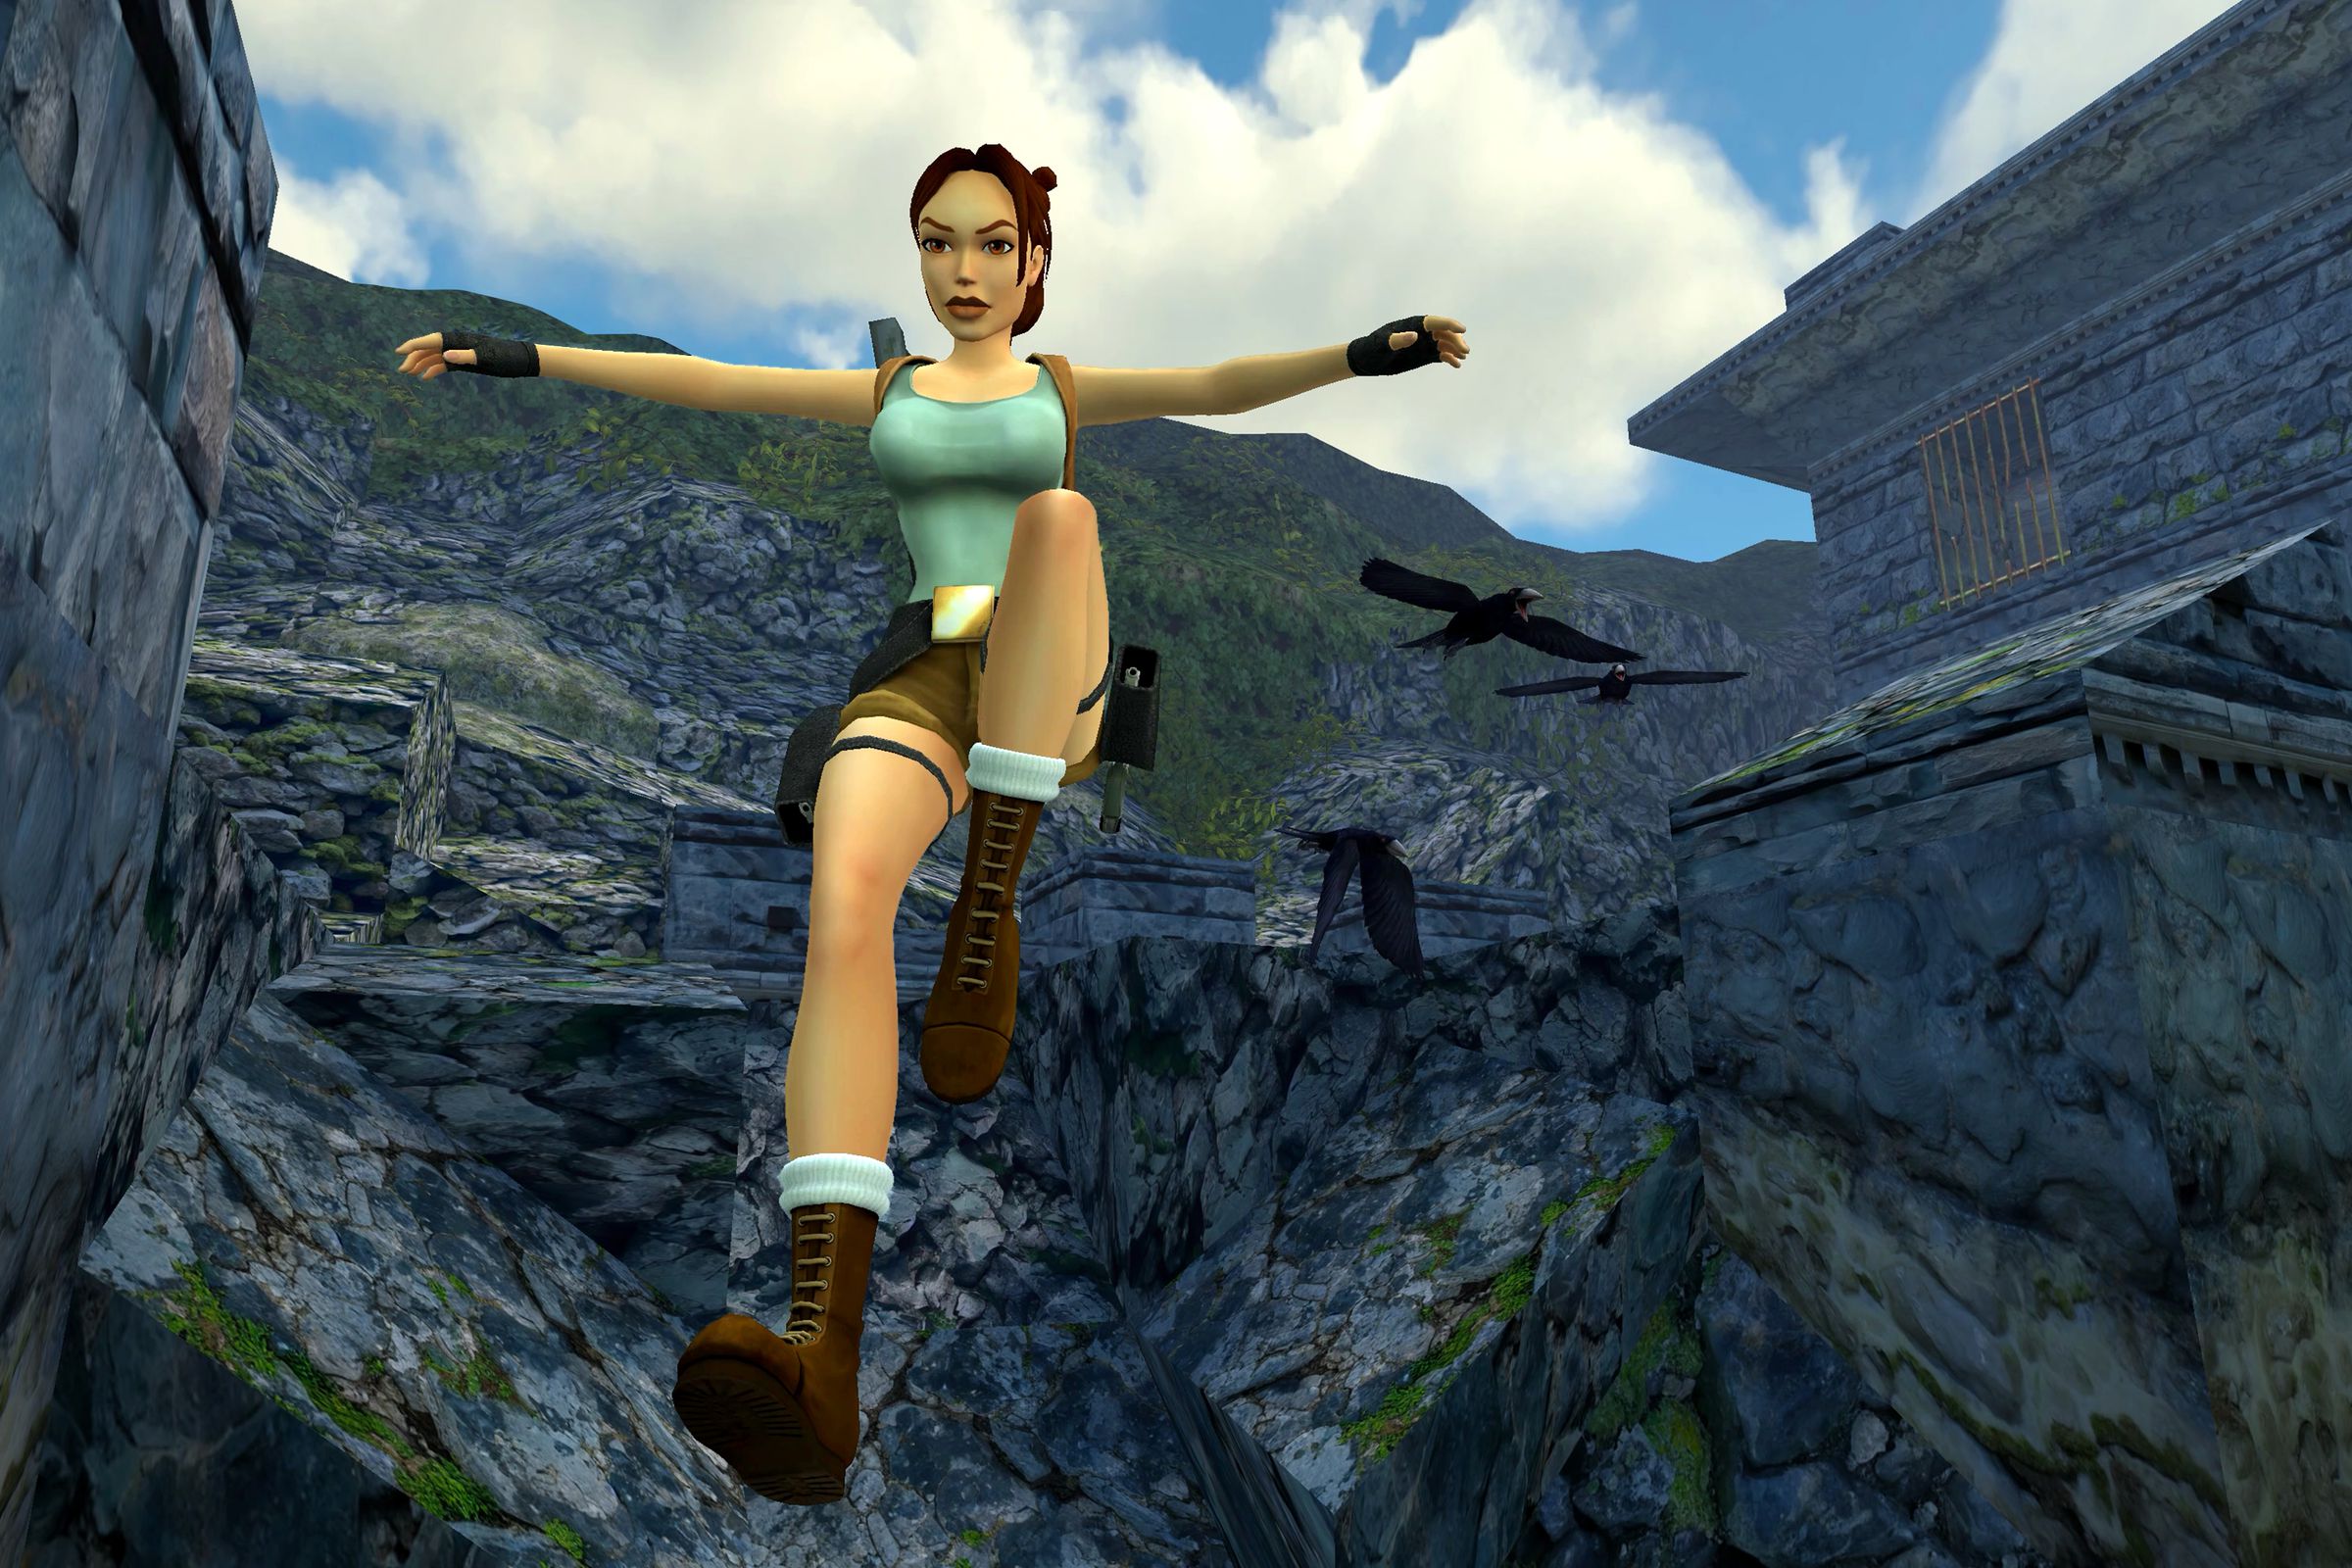 Screenshot from Tomb Raider 1-3 Remastered featuring Lara Croft jumping in the air with a mountain behind her.